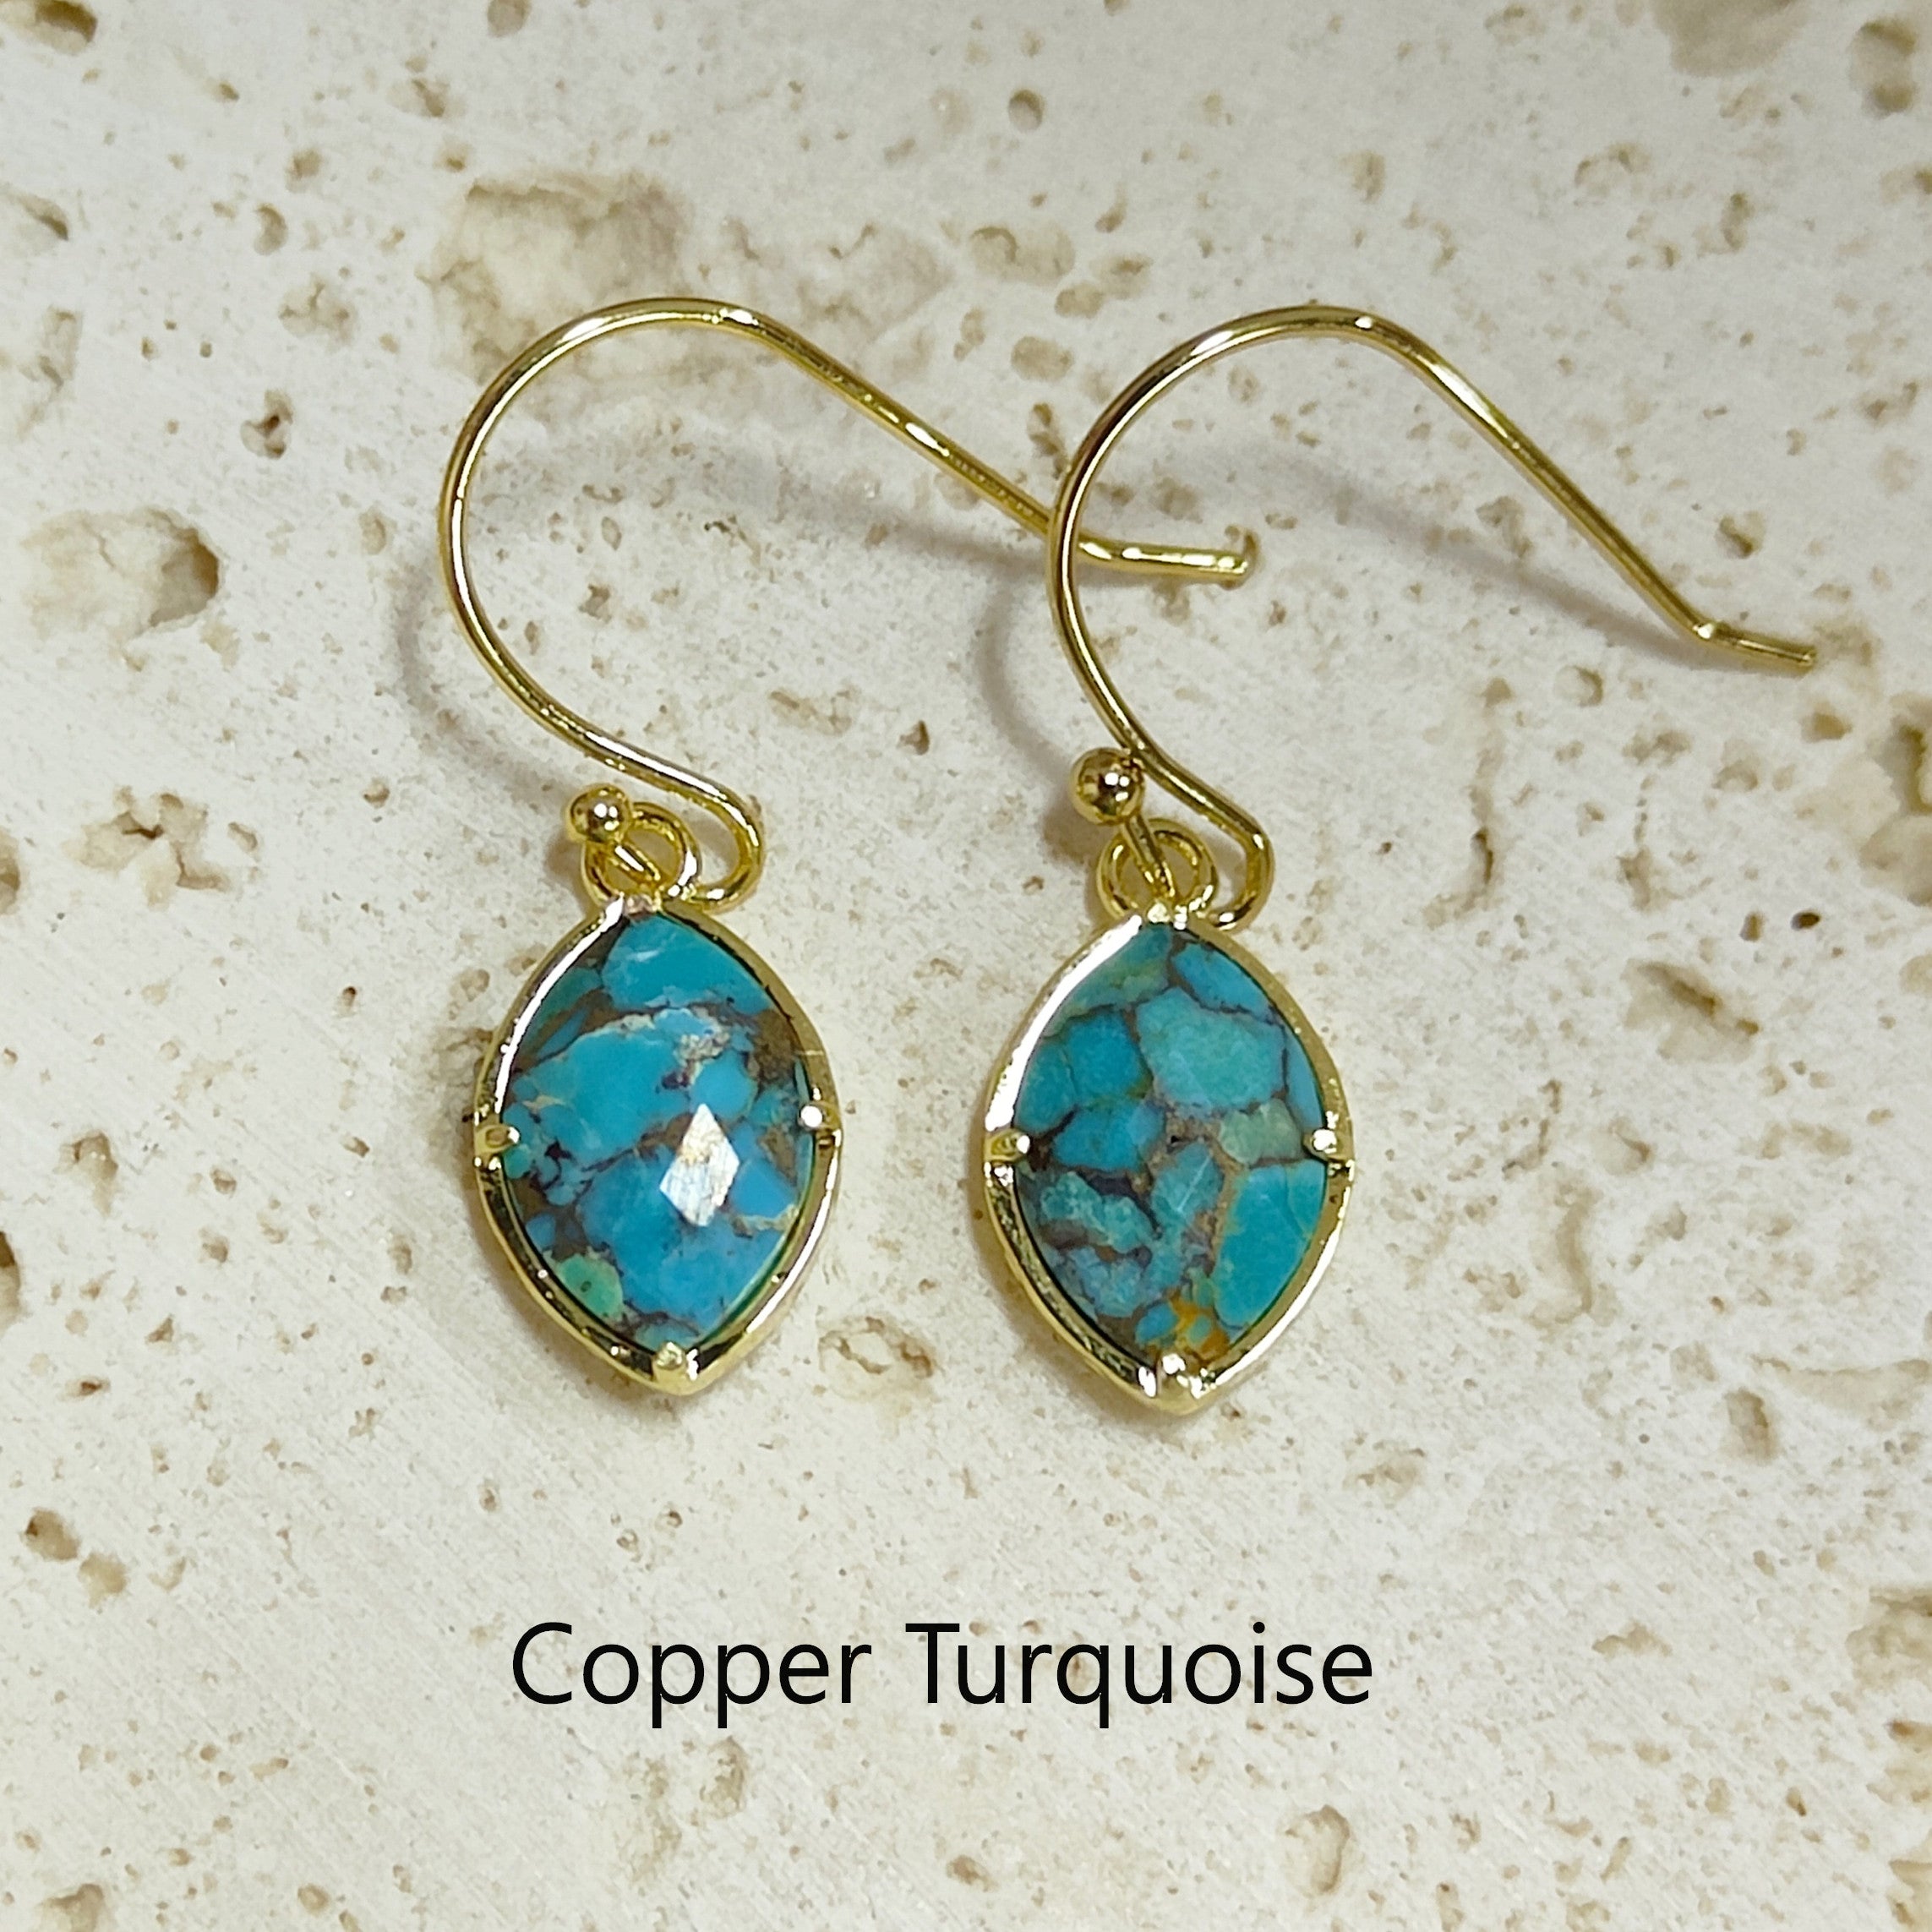 Wholesale Gold Plated Marquise Gemstone Earrings, Healing Crystals Stone Earrings Jewelry AL573 copper turquoise earrings